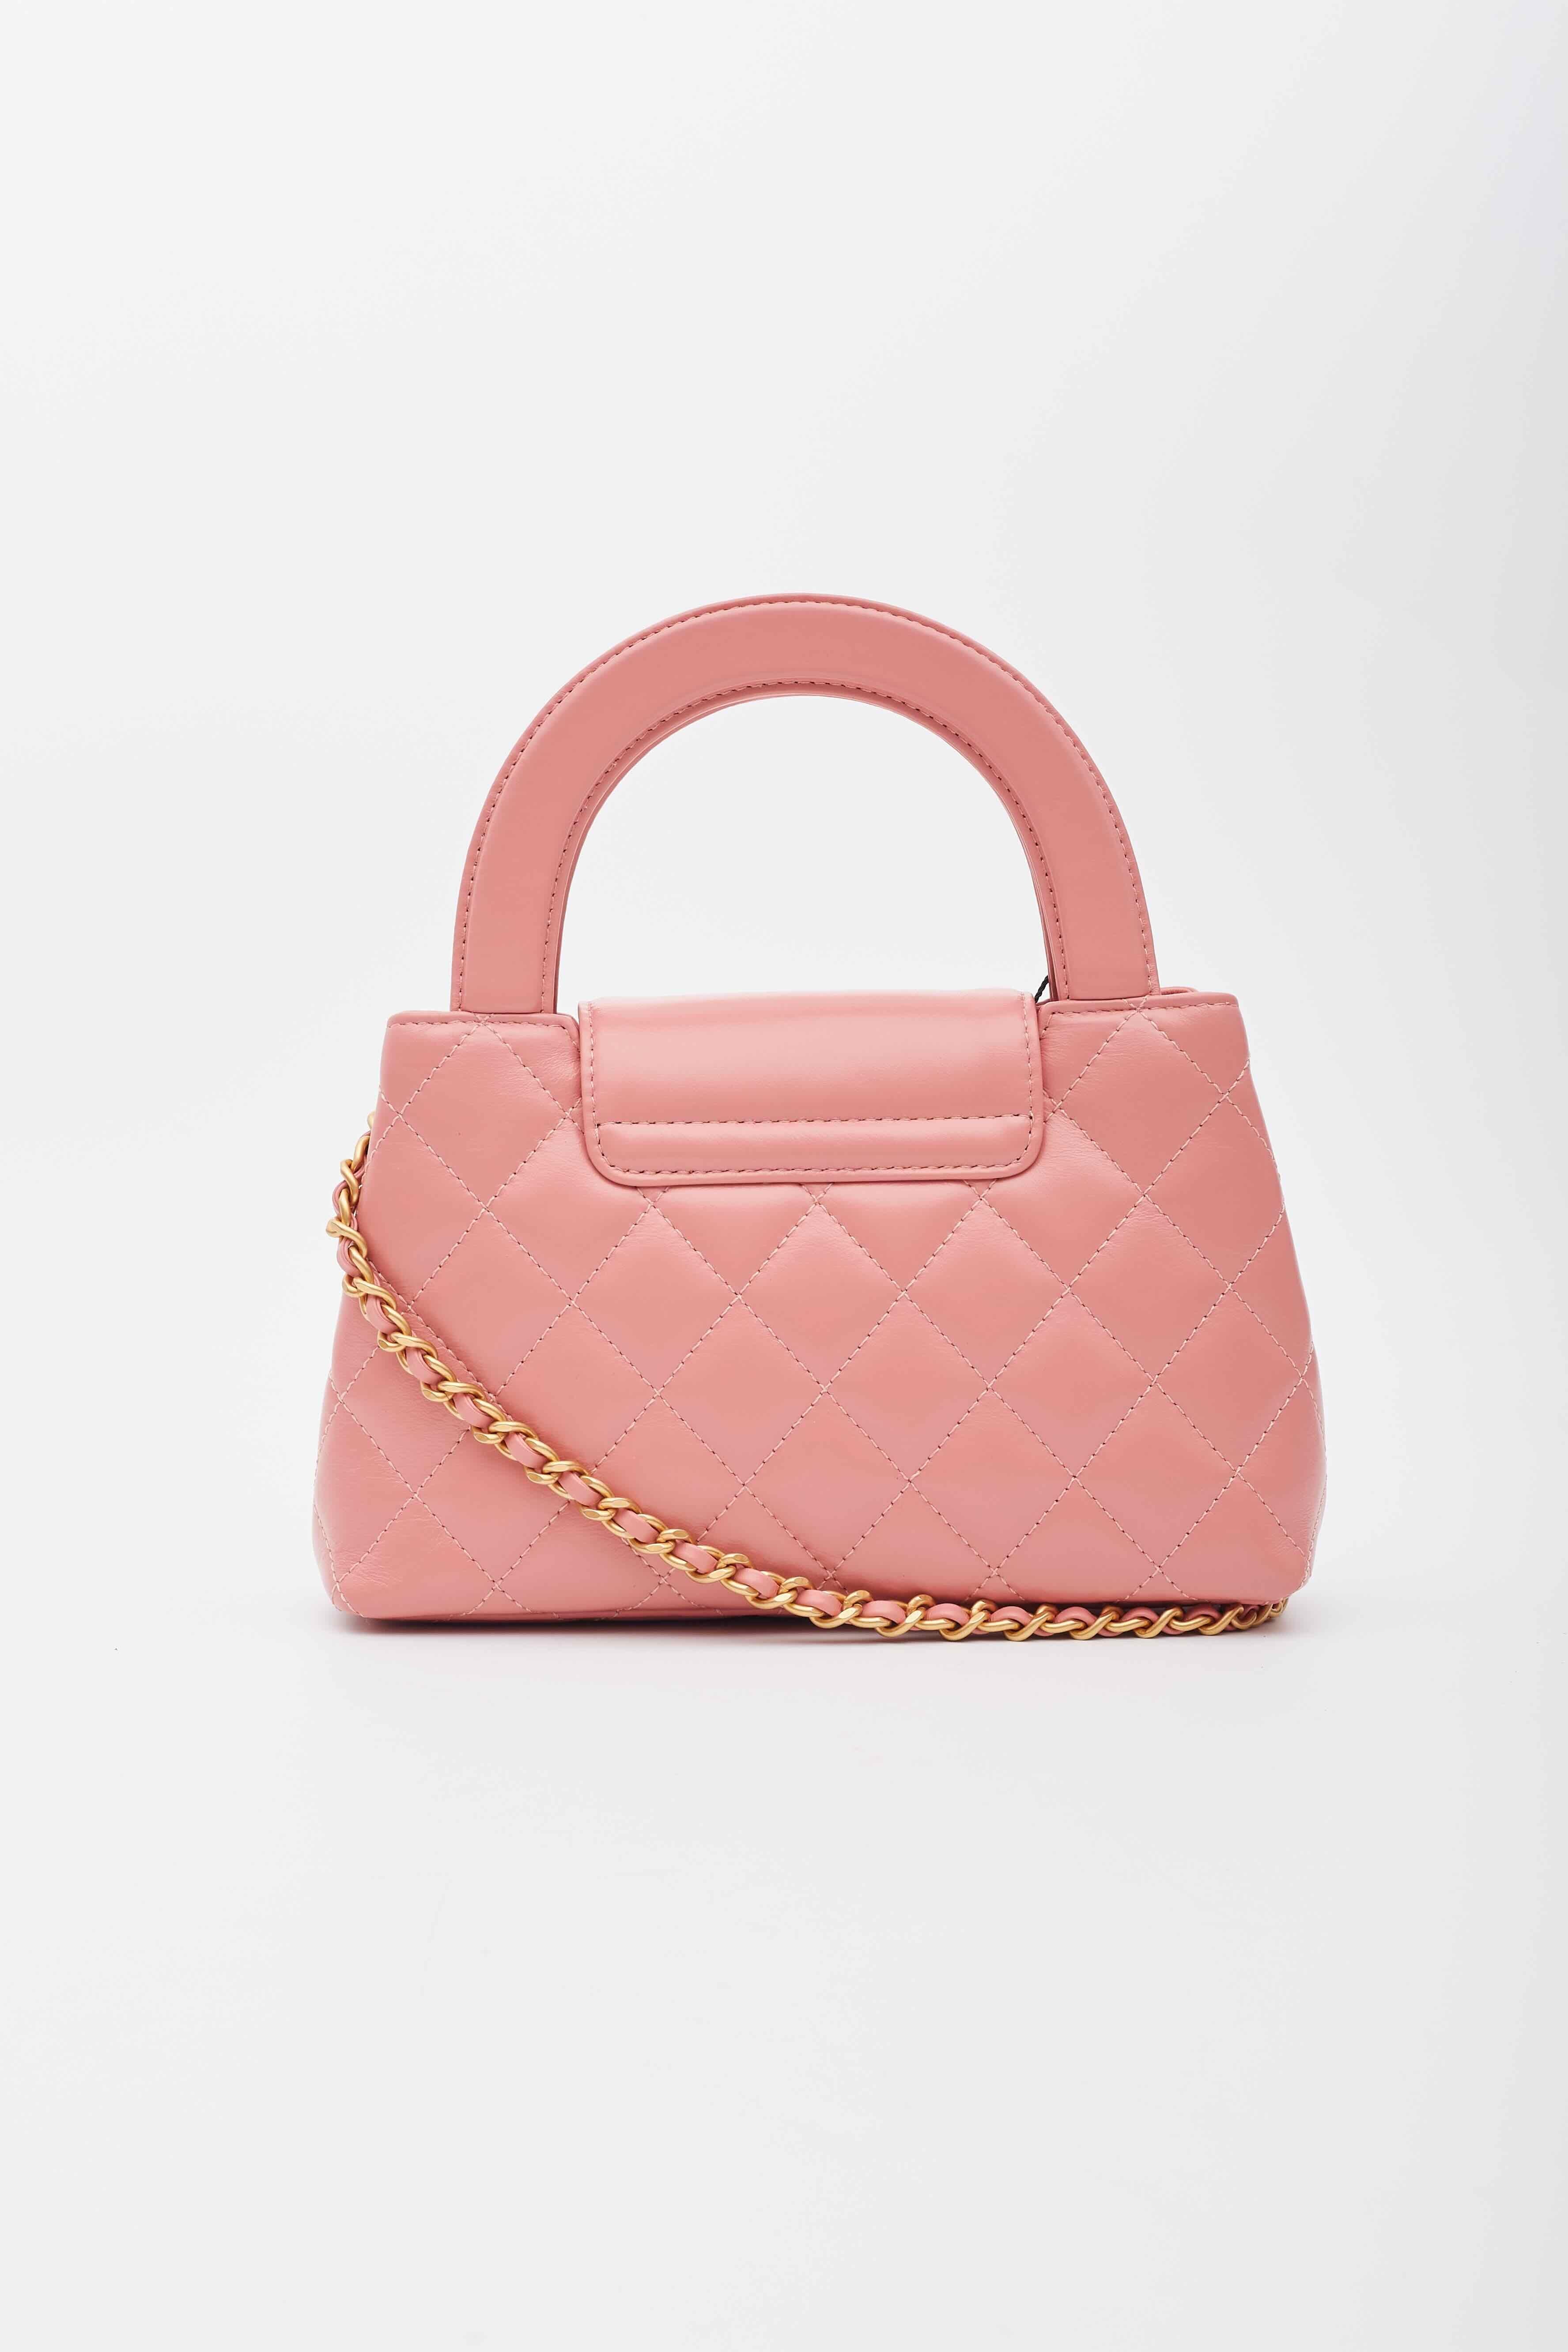 Chanel Shiny Aged Calfskin Coral Pink Mini Kelly Shopping Bag 2023 In Excellent Condition For Sale In Montreal, Quebec